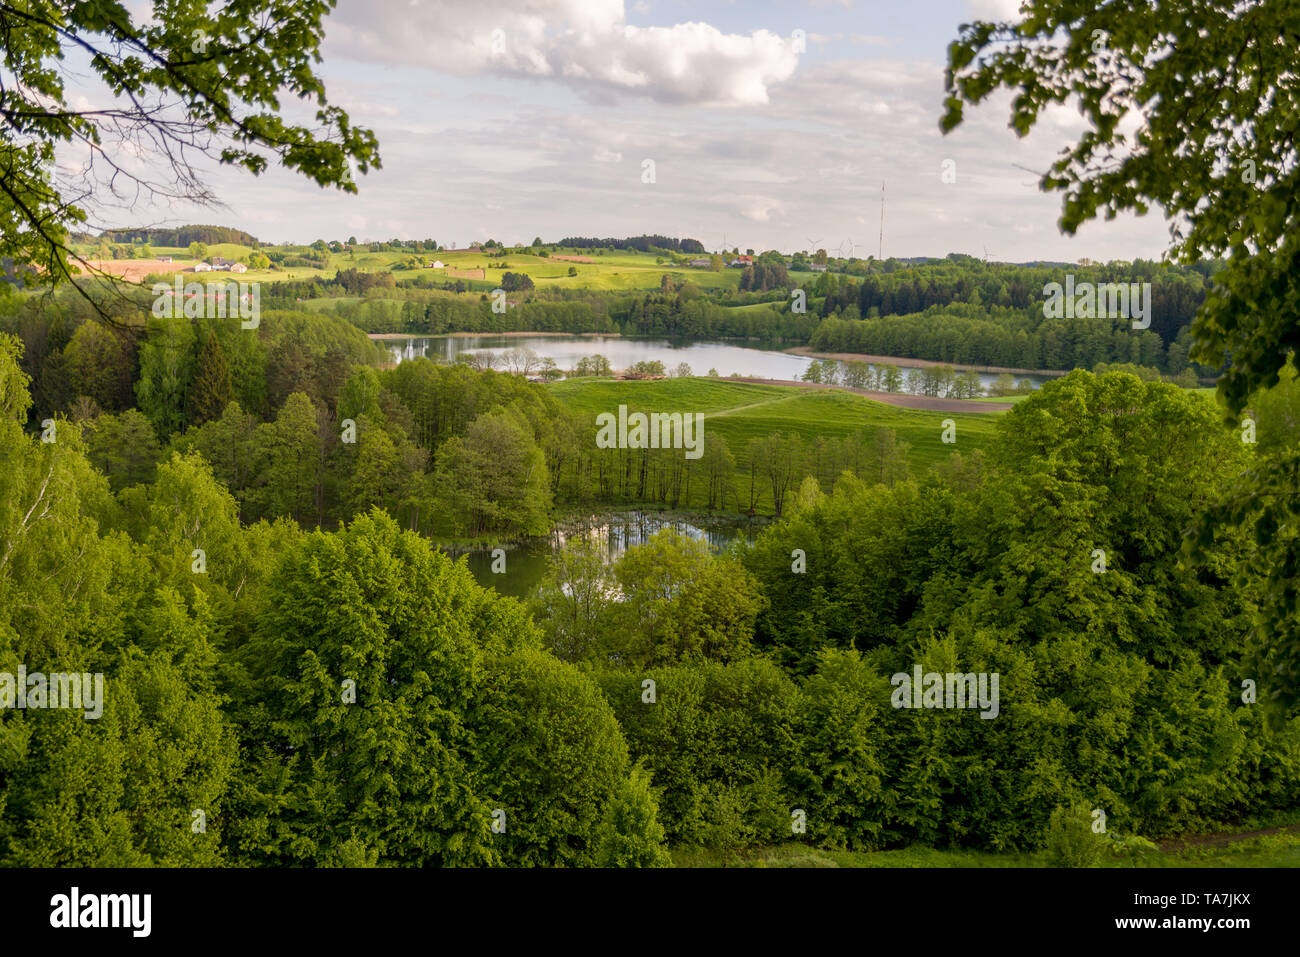 Suwałki Landscape Park, view of the lakes from the Castle Mountain Stock Photo